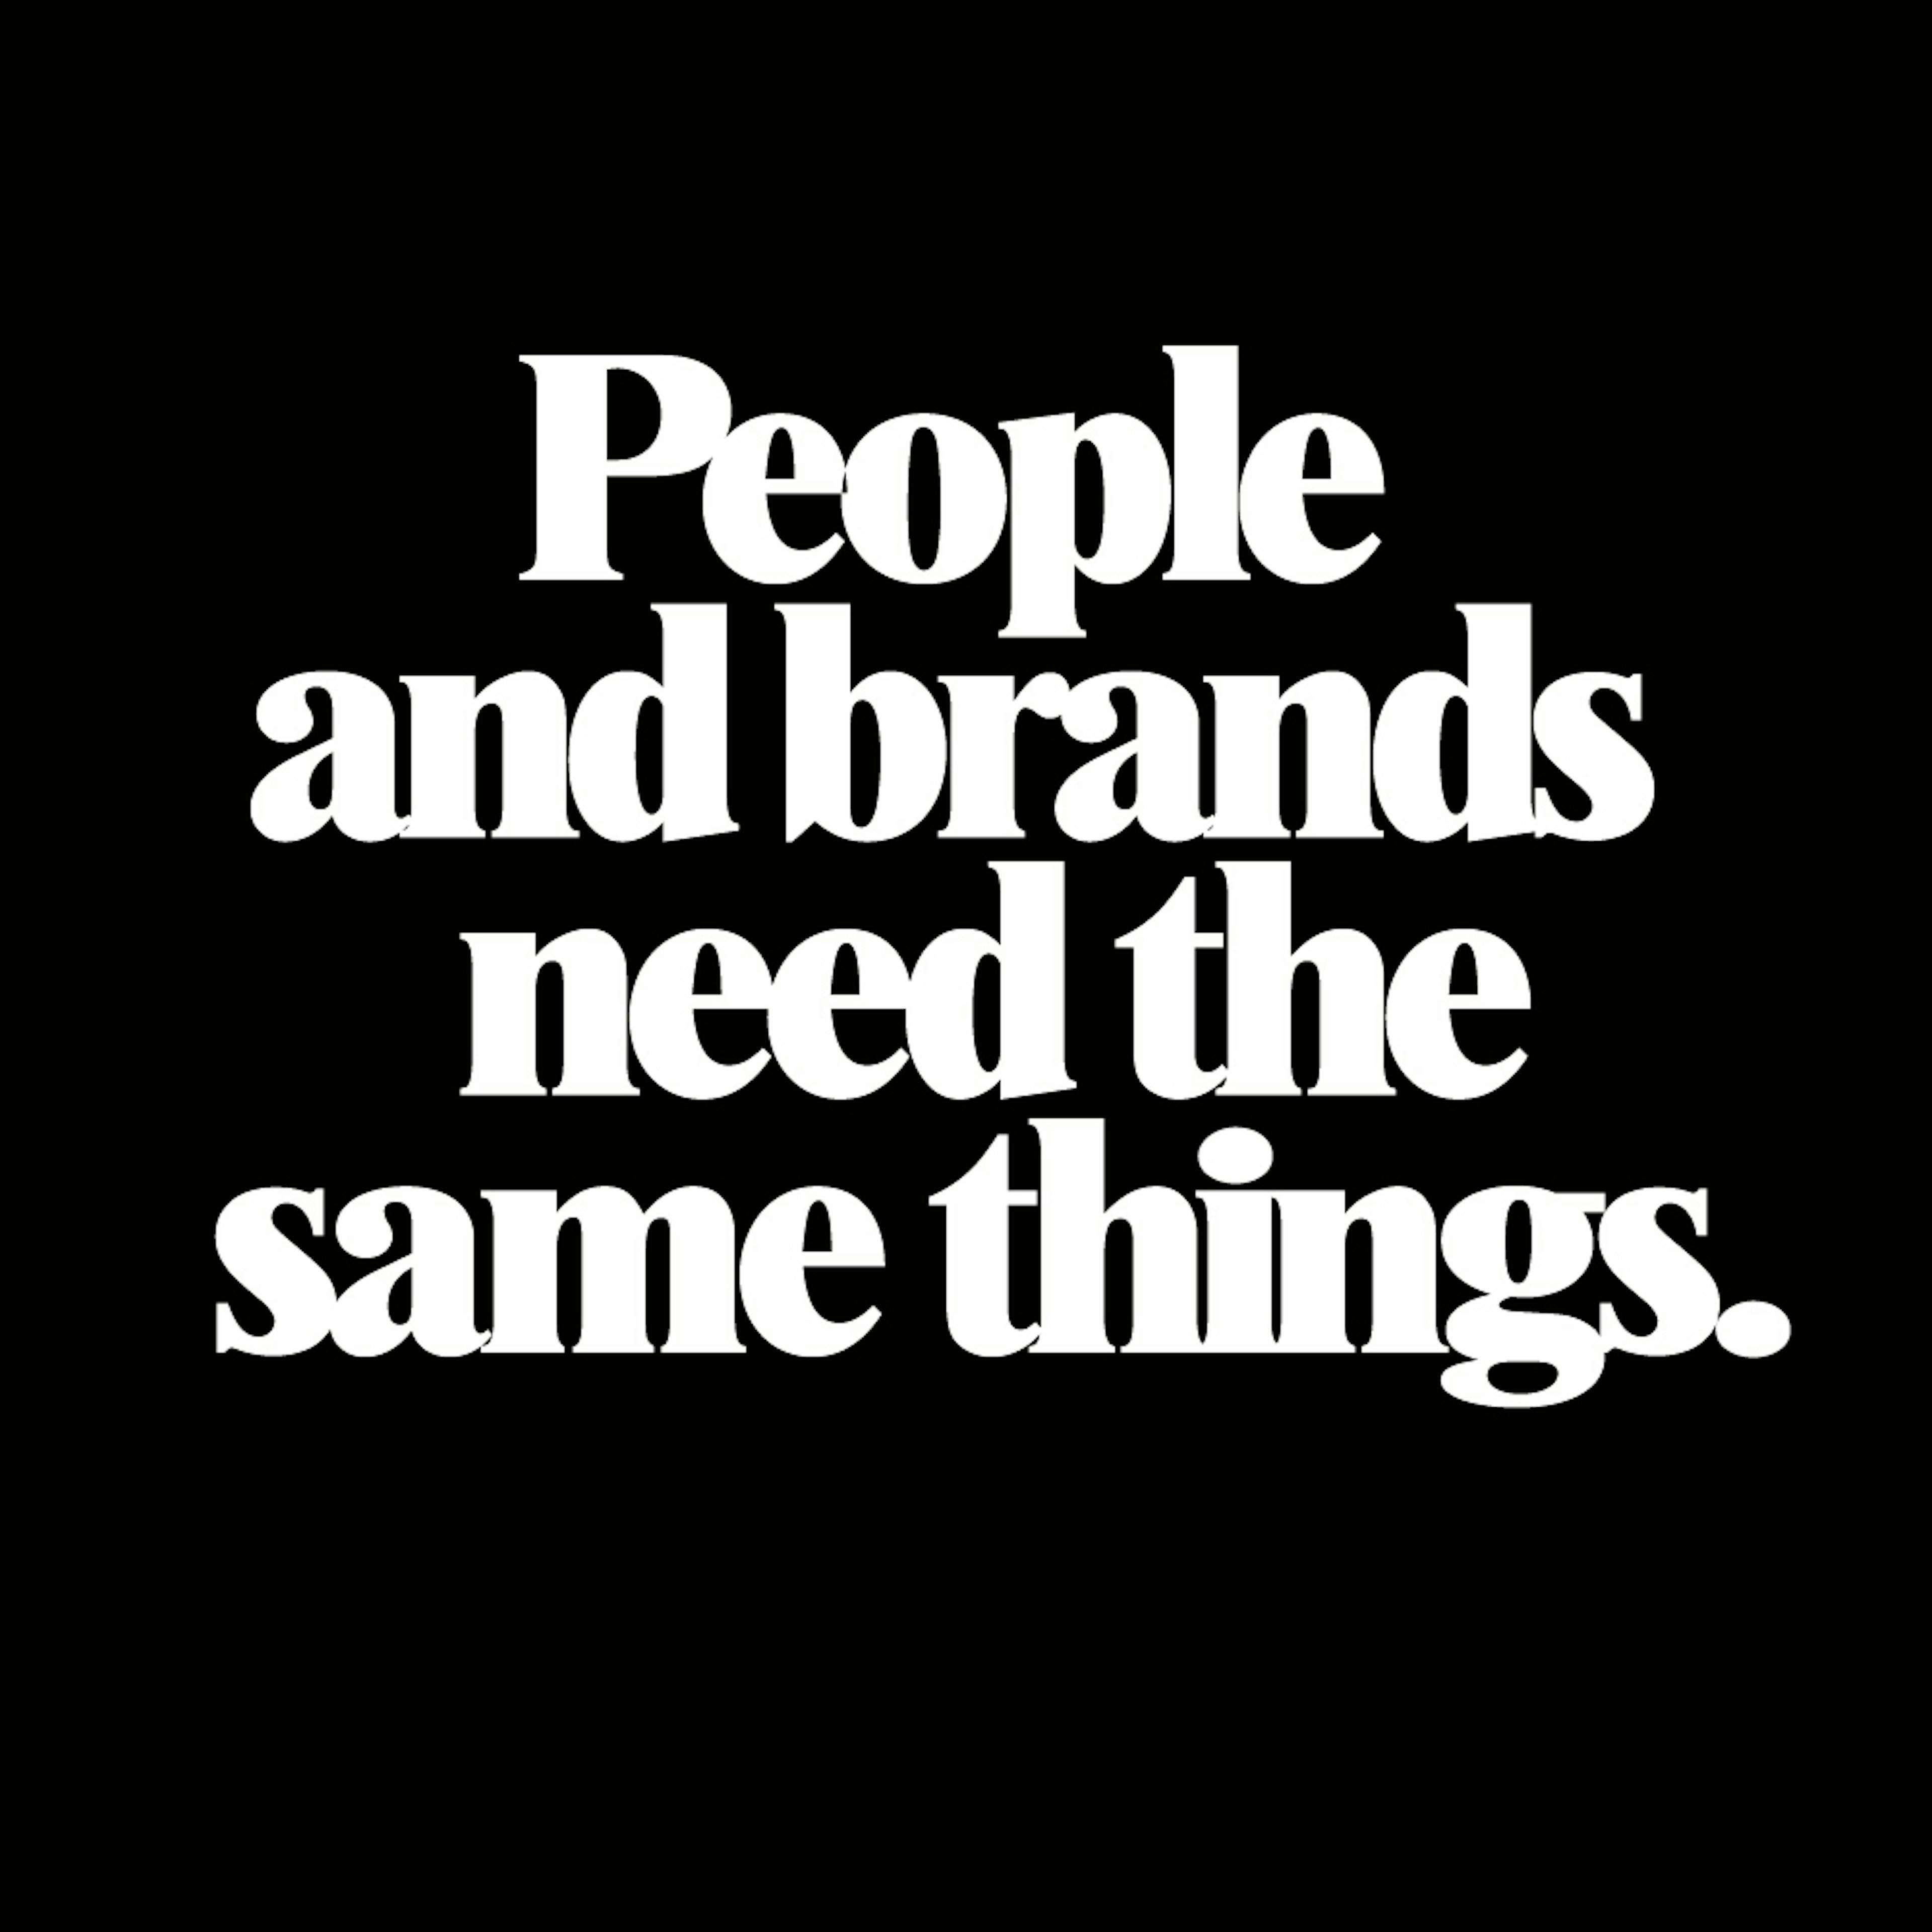 A sign that says People and brands need the same things